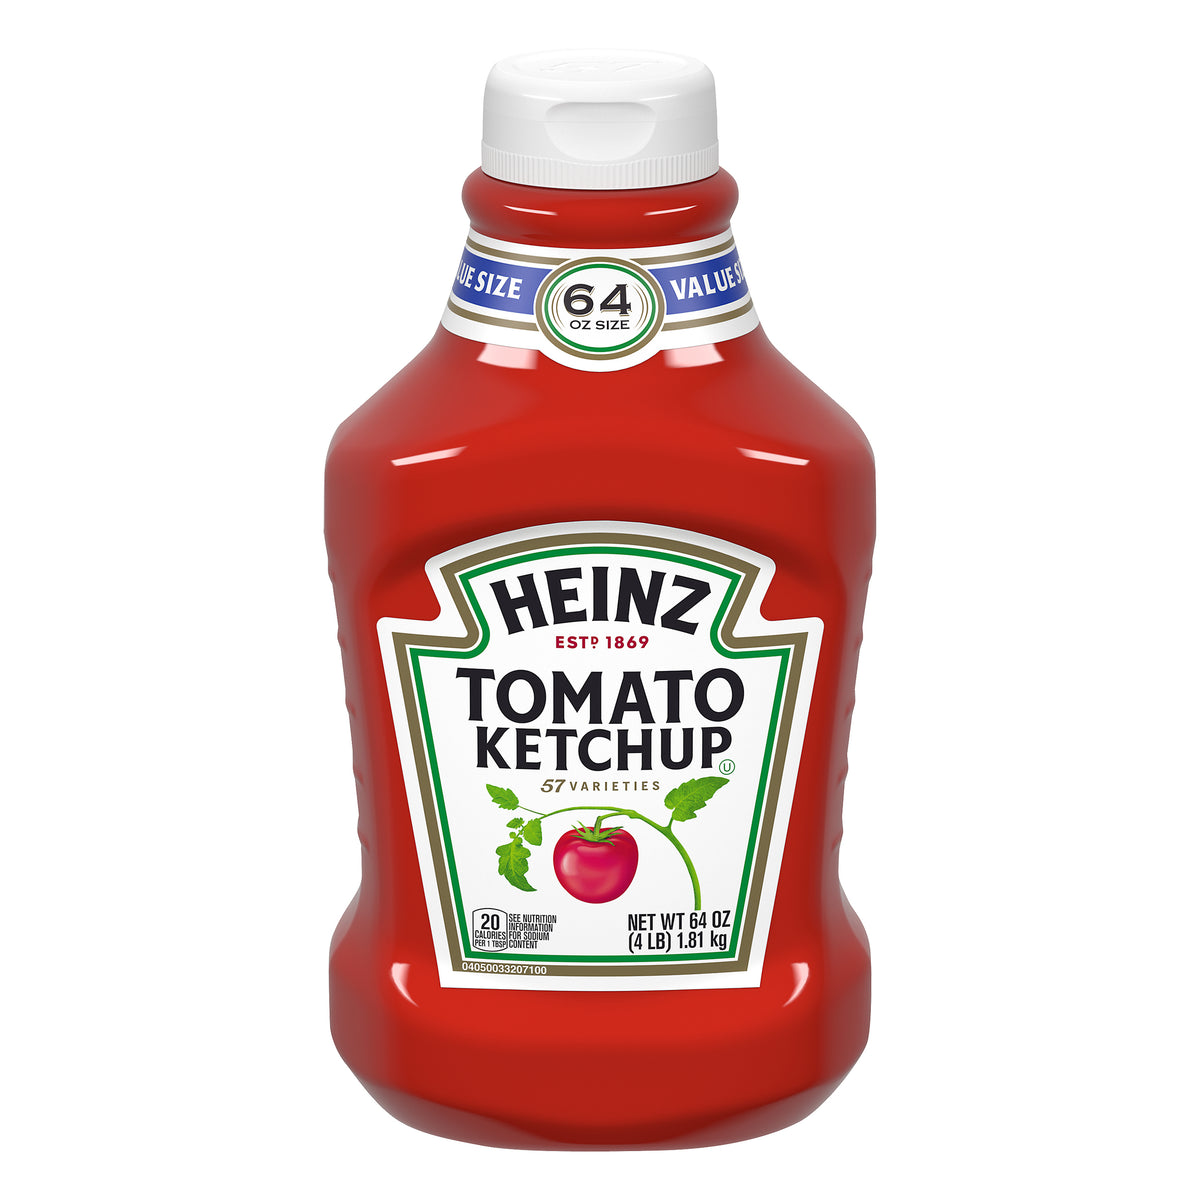 How to Get Heinz Ketchup Out of the Bottle